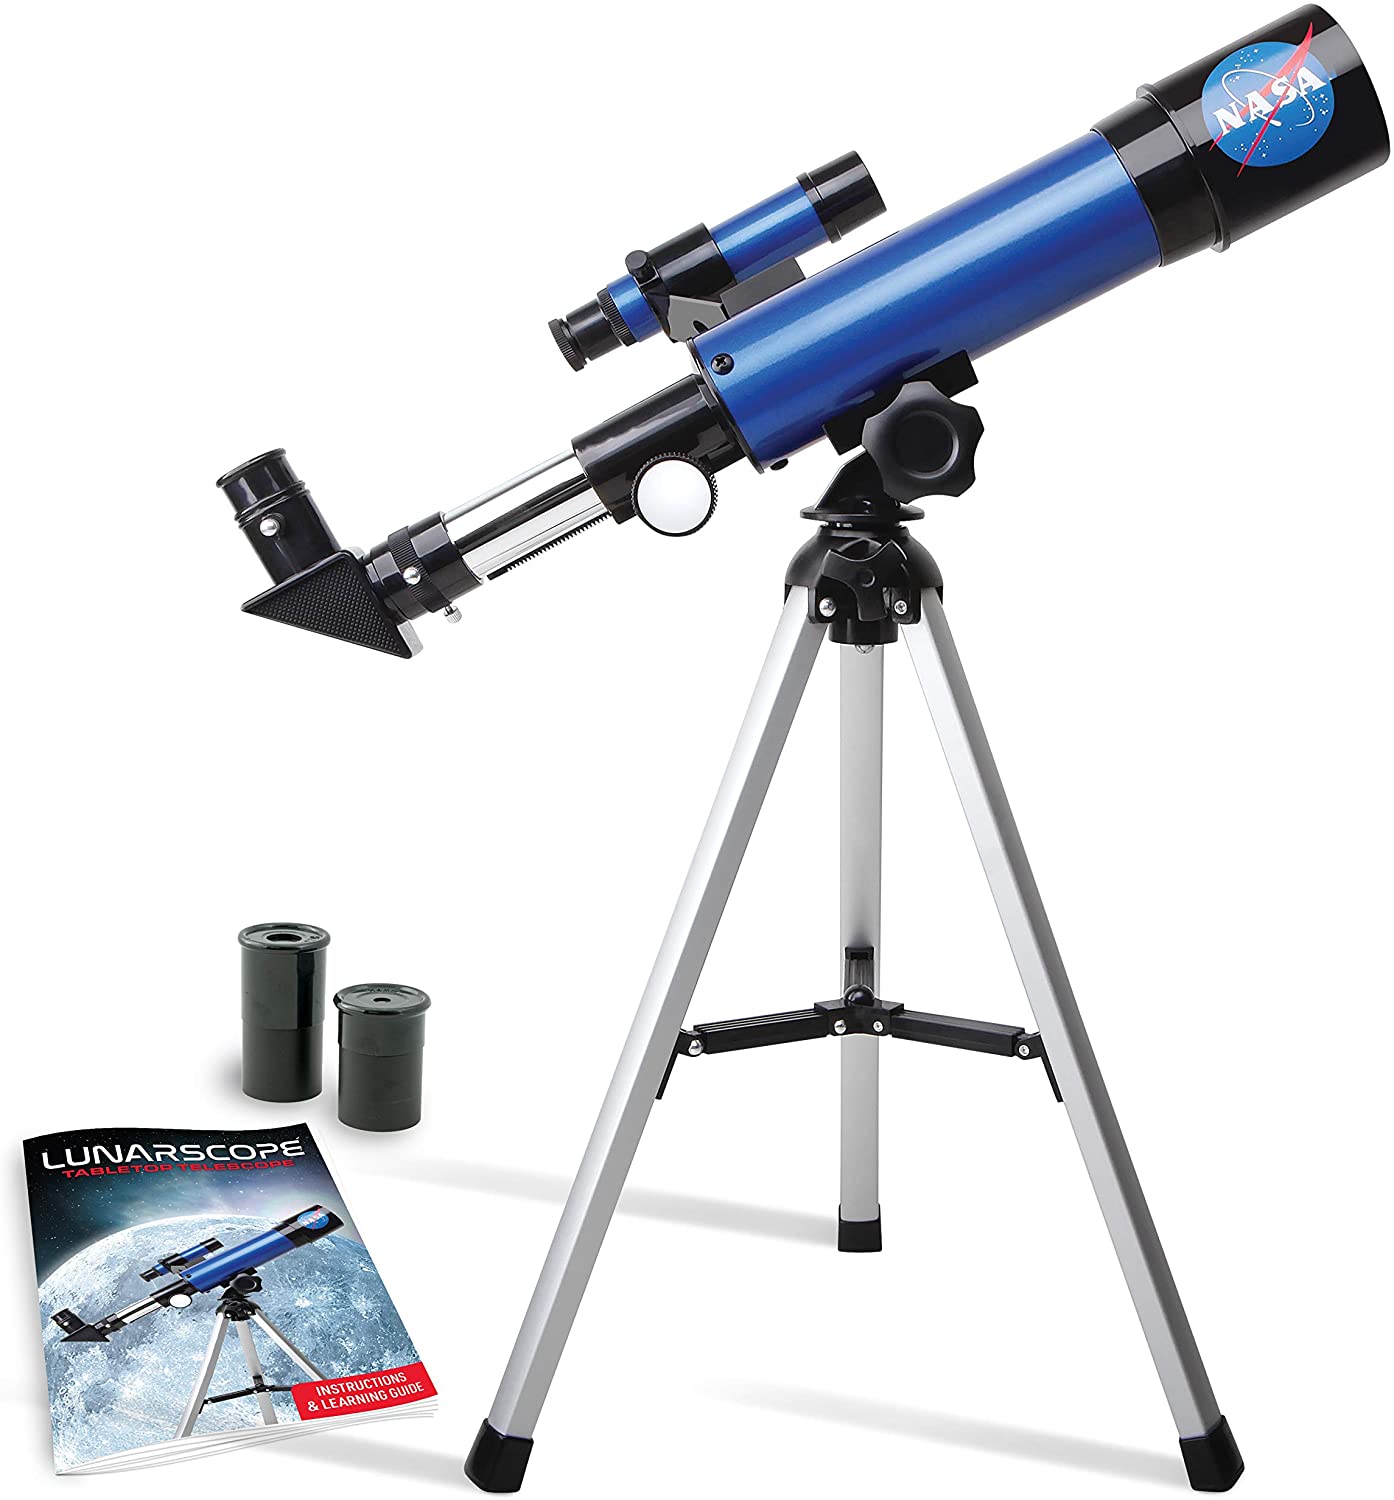 Review of NASA Lunar Telescope for Kids, Capable of 90x Magnification